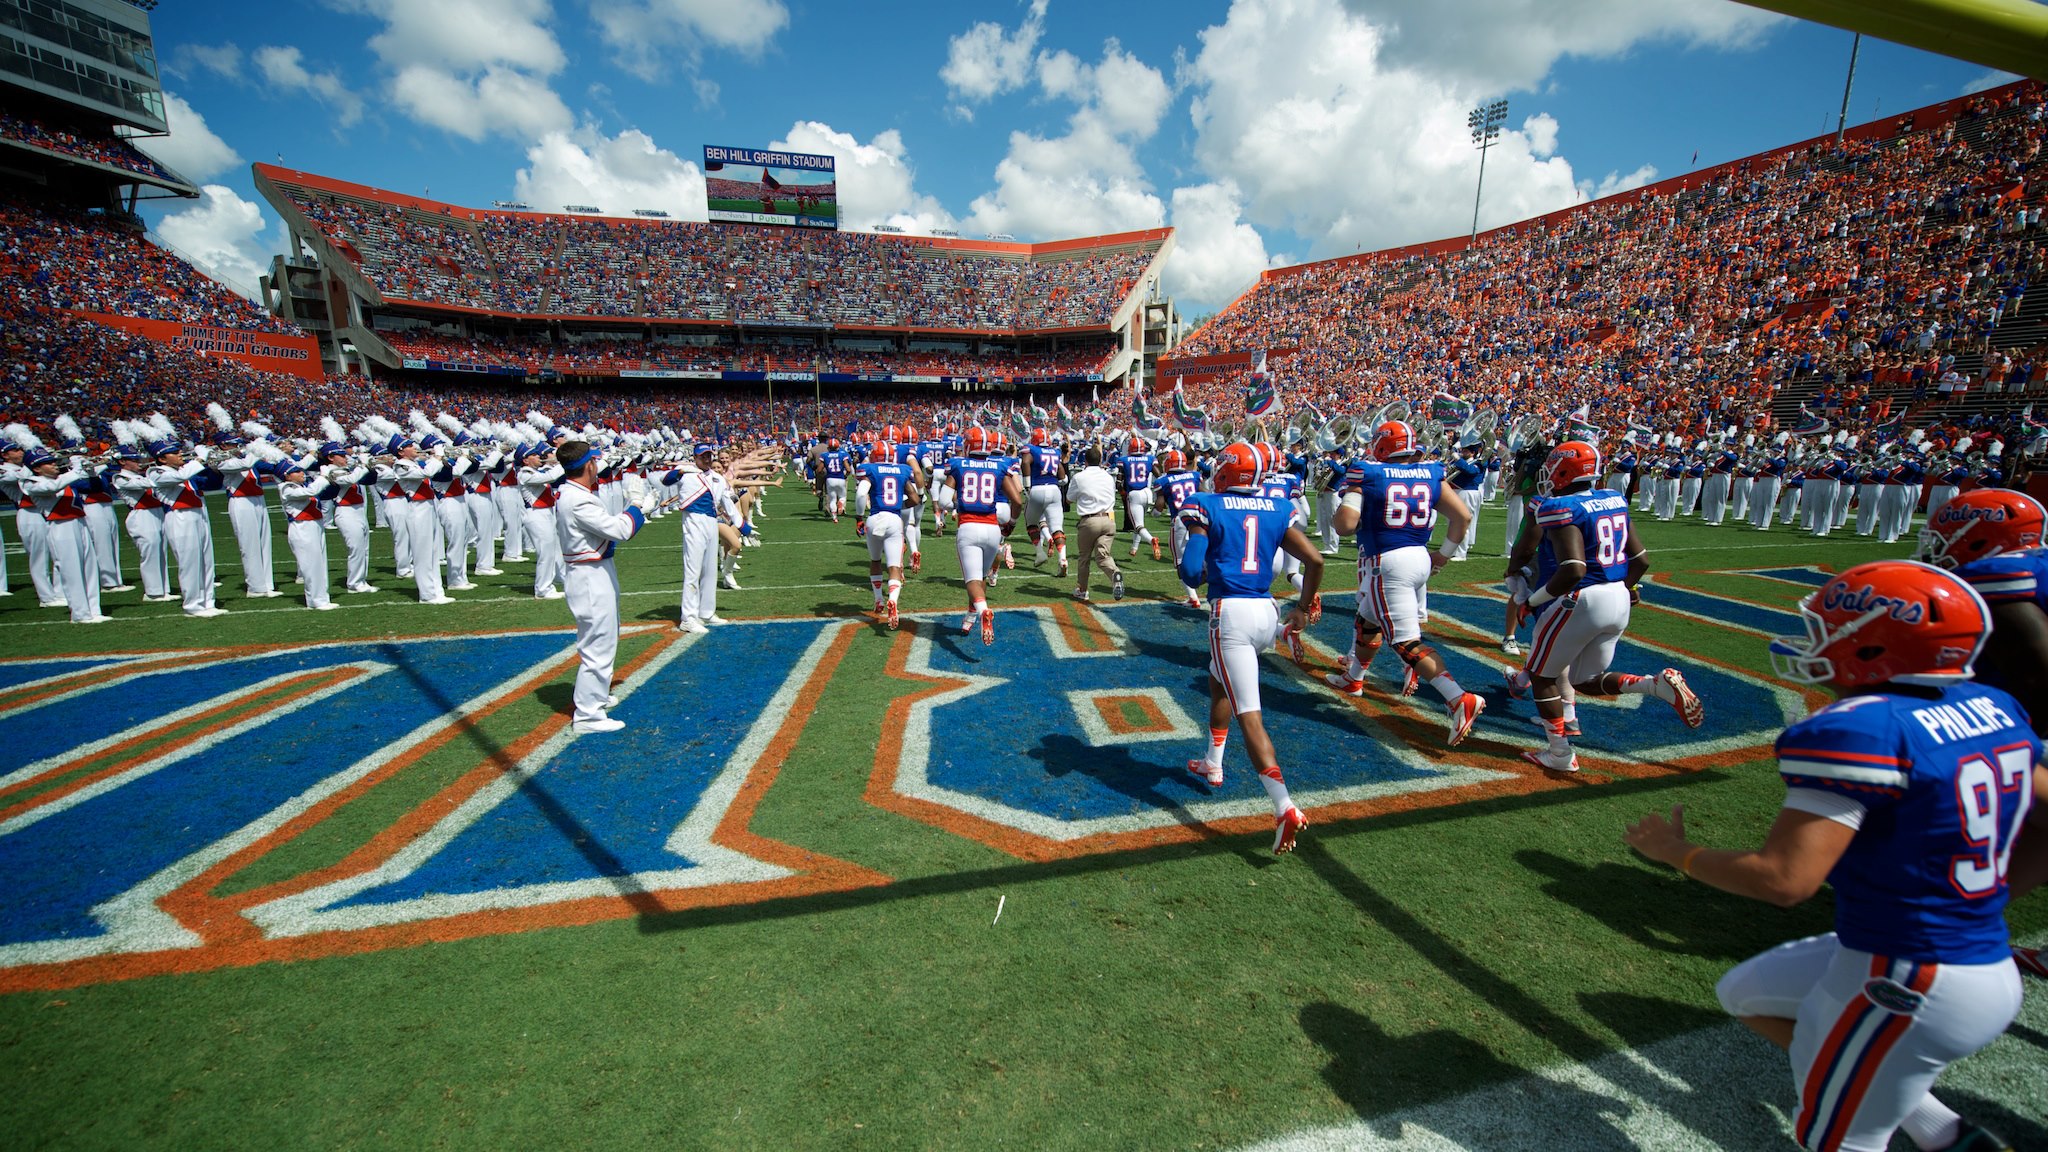 The University Of Florida Gator Marching Band Is Looking For A Fall